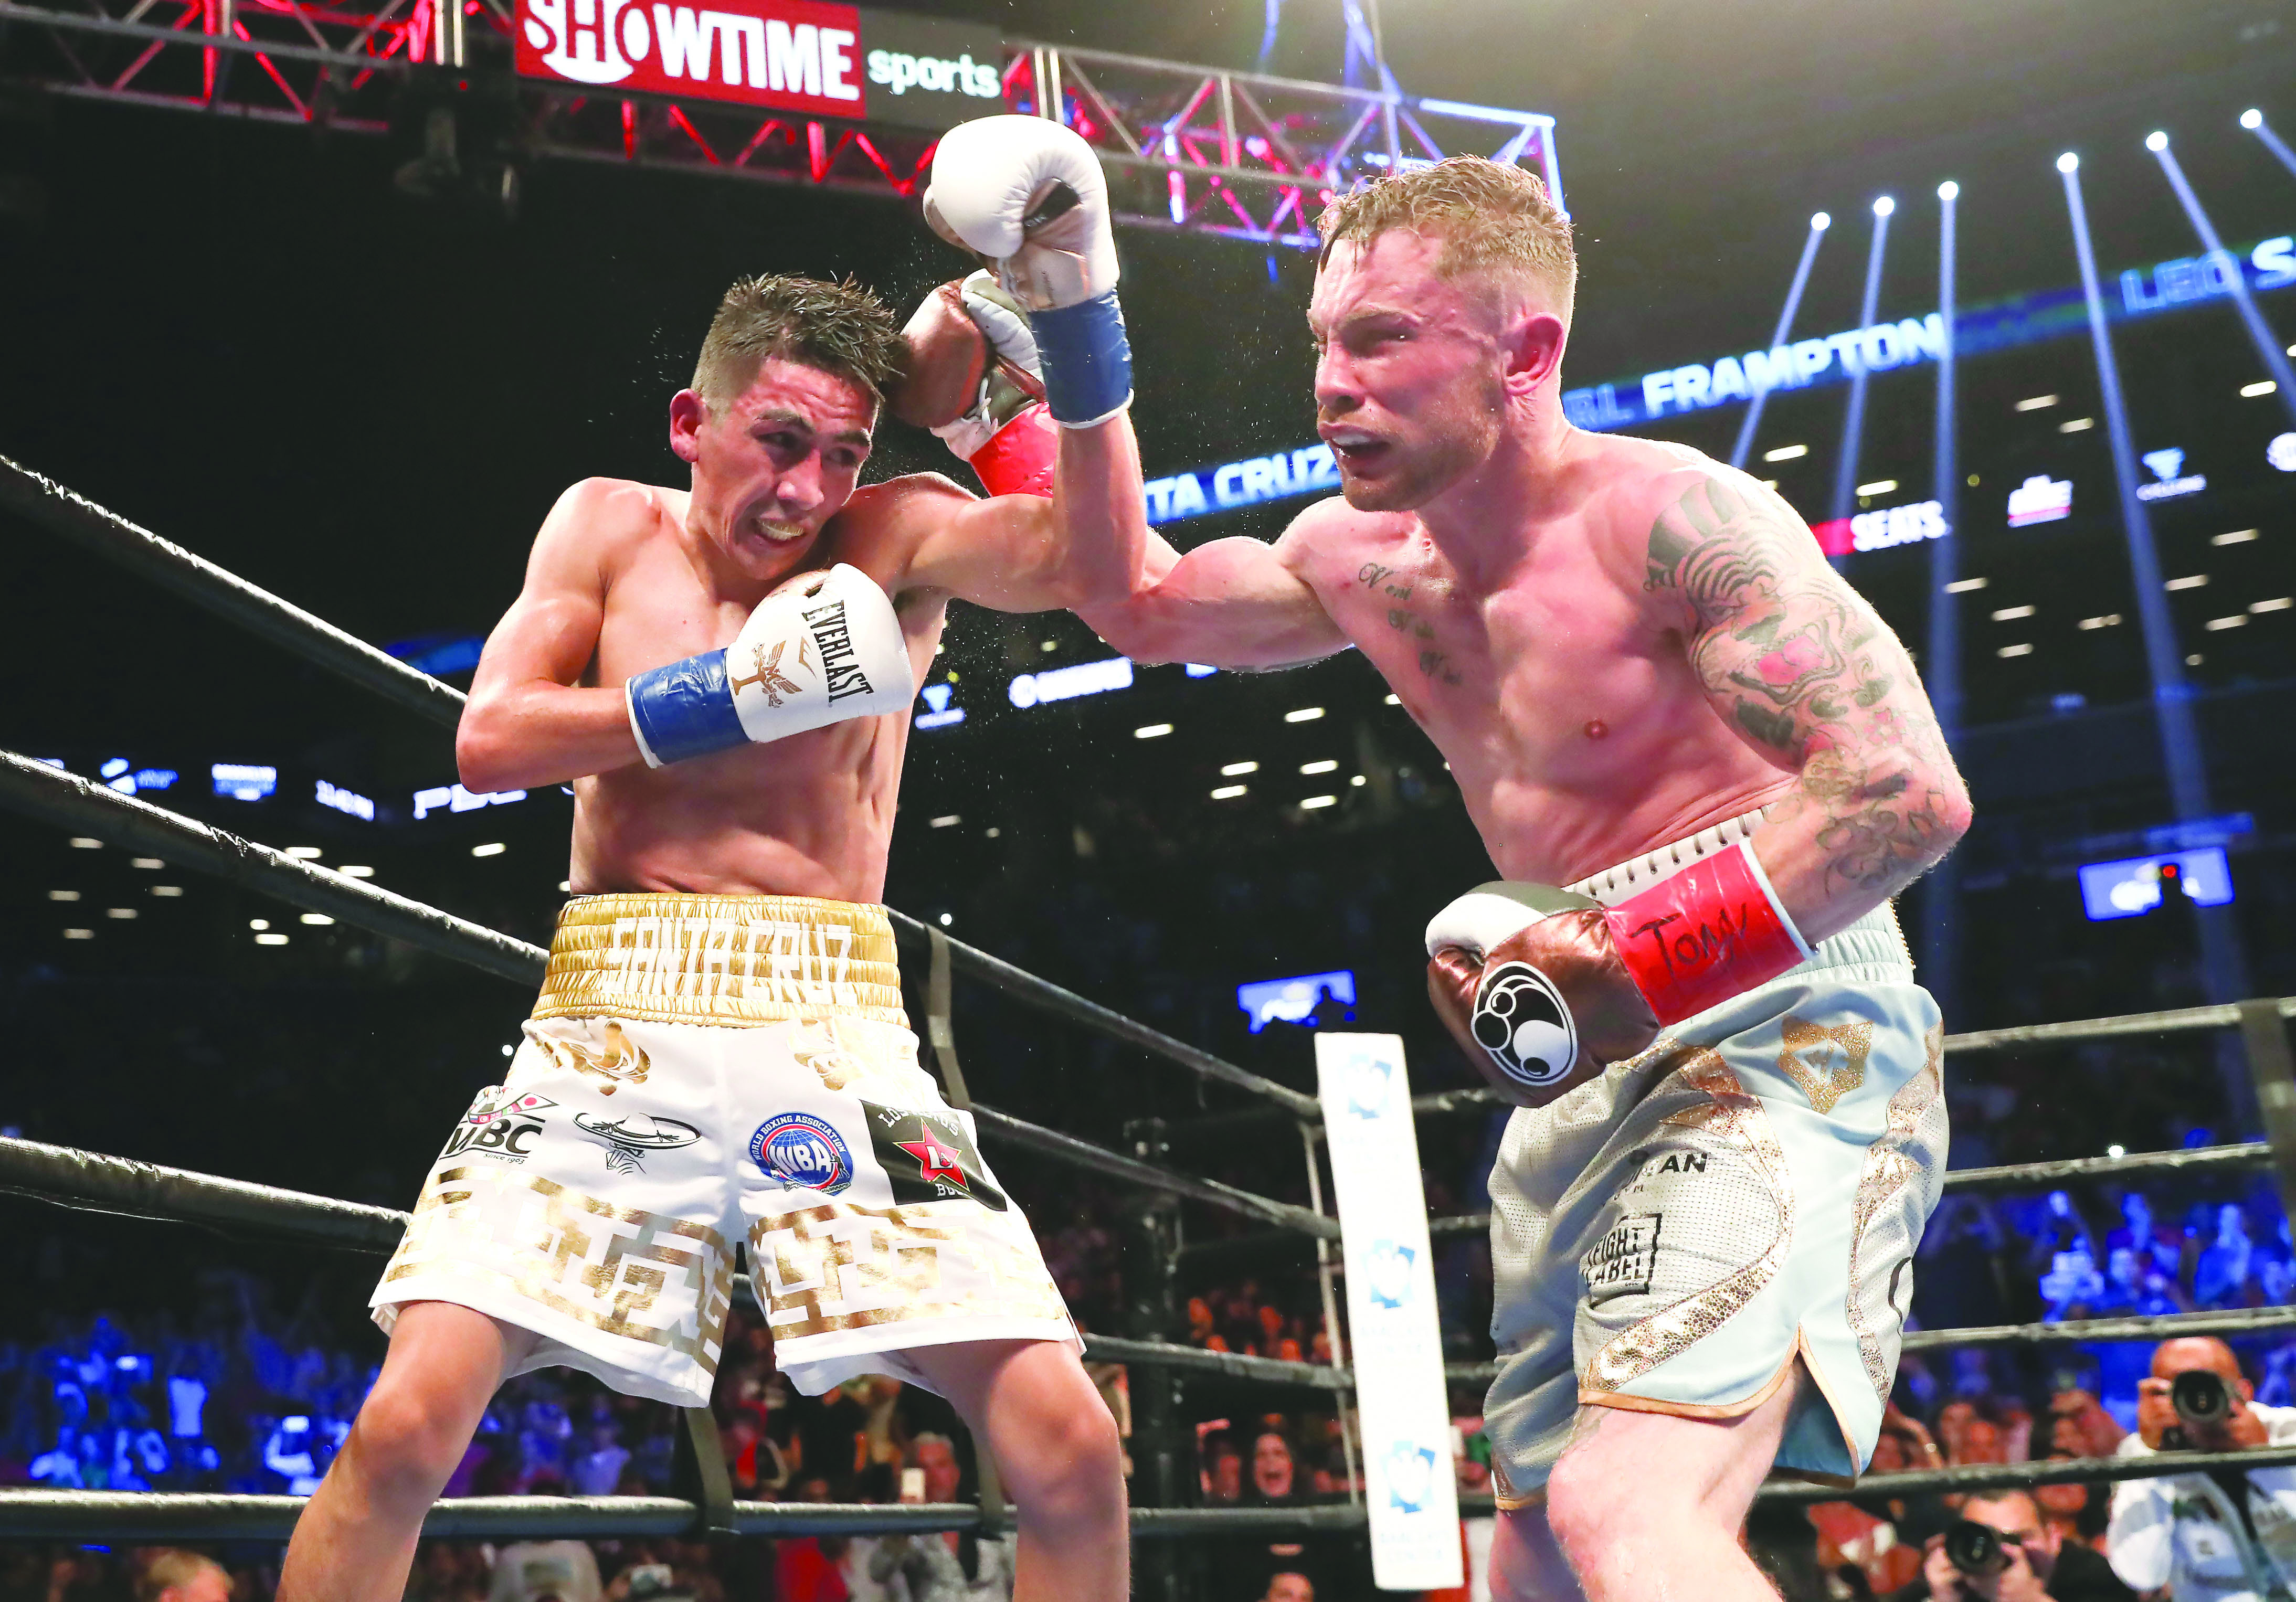 Carl Frampton and Leo Santa Cruz served up a ‘fight of the year’ contender at the Barclays Centre in Brookly back in July. Expect another classic when they renew hostilities at the MGM Grand Garden Arena on Saturday night